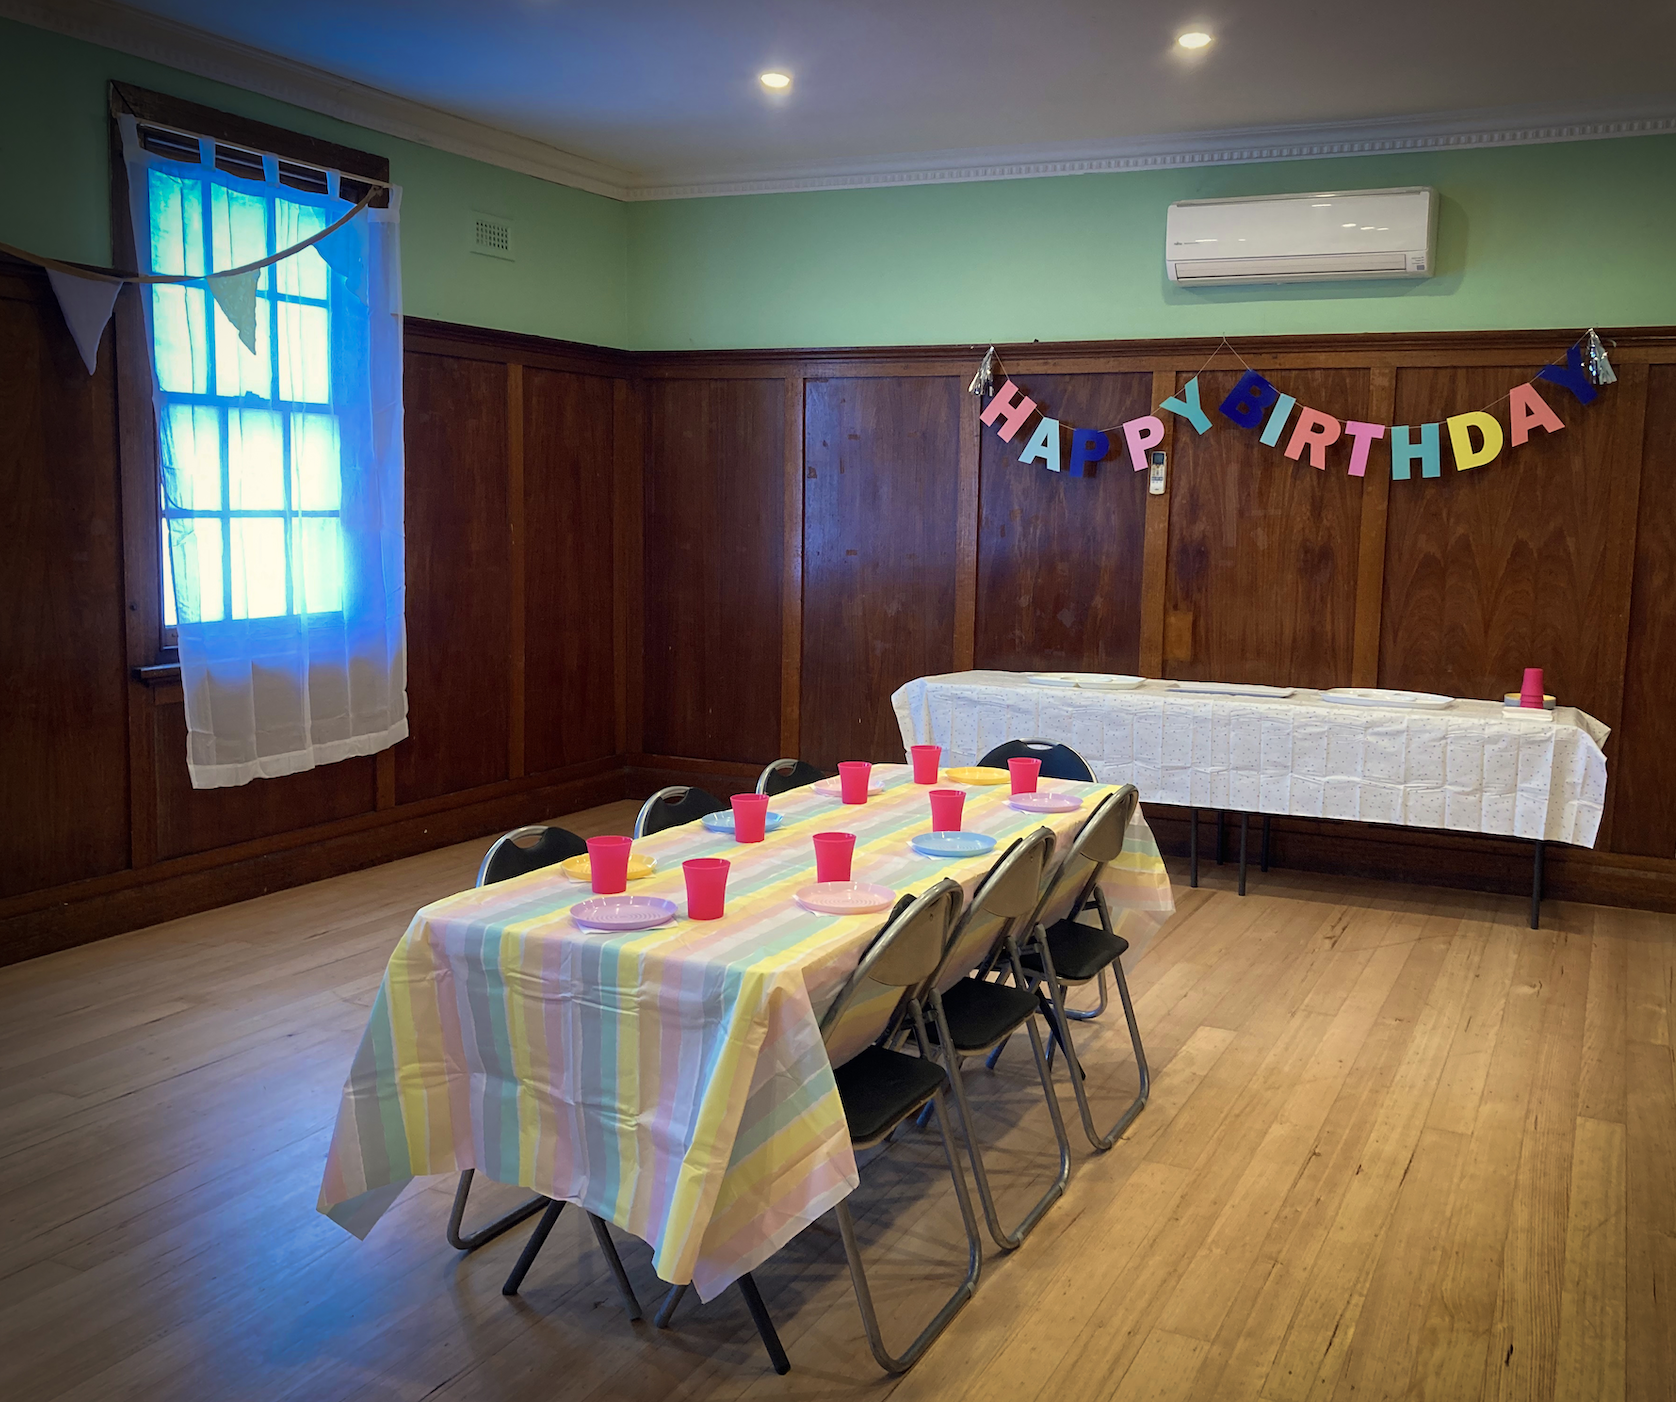 Women's Circus birthday party set up in the community room